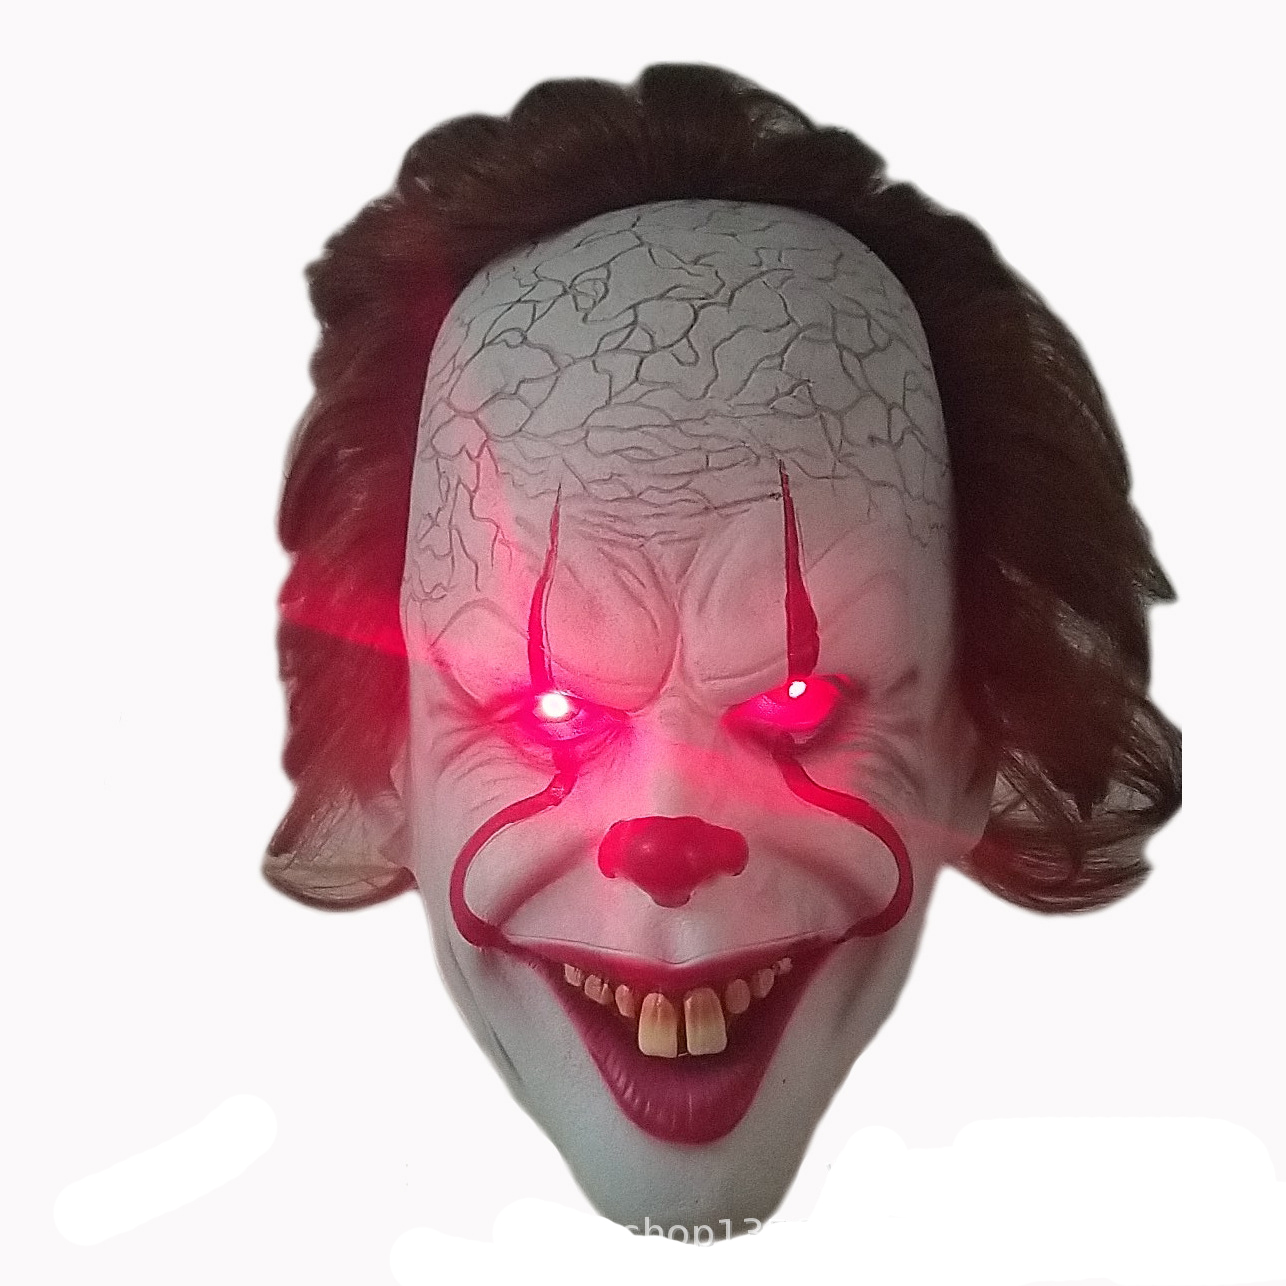 It Halloween Mask Creepy Scary Pennywise Clown Full Face Horror 2019 Movie Joker Costume Party Festival Cosplay Prop Decoration White 